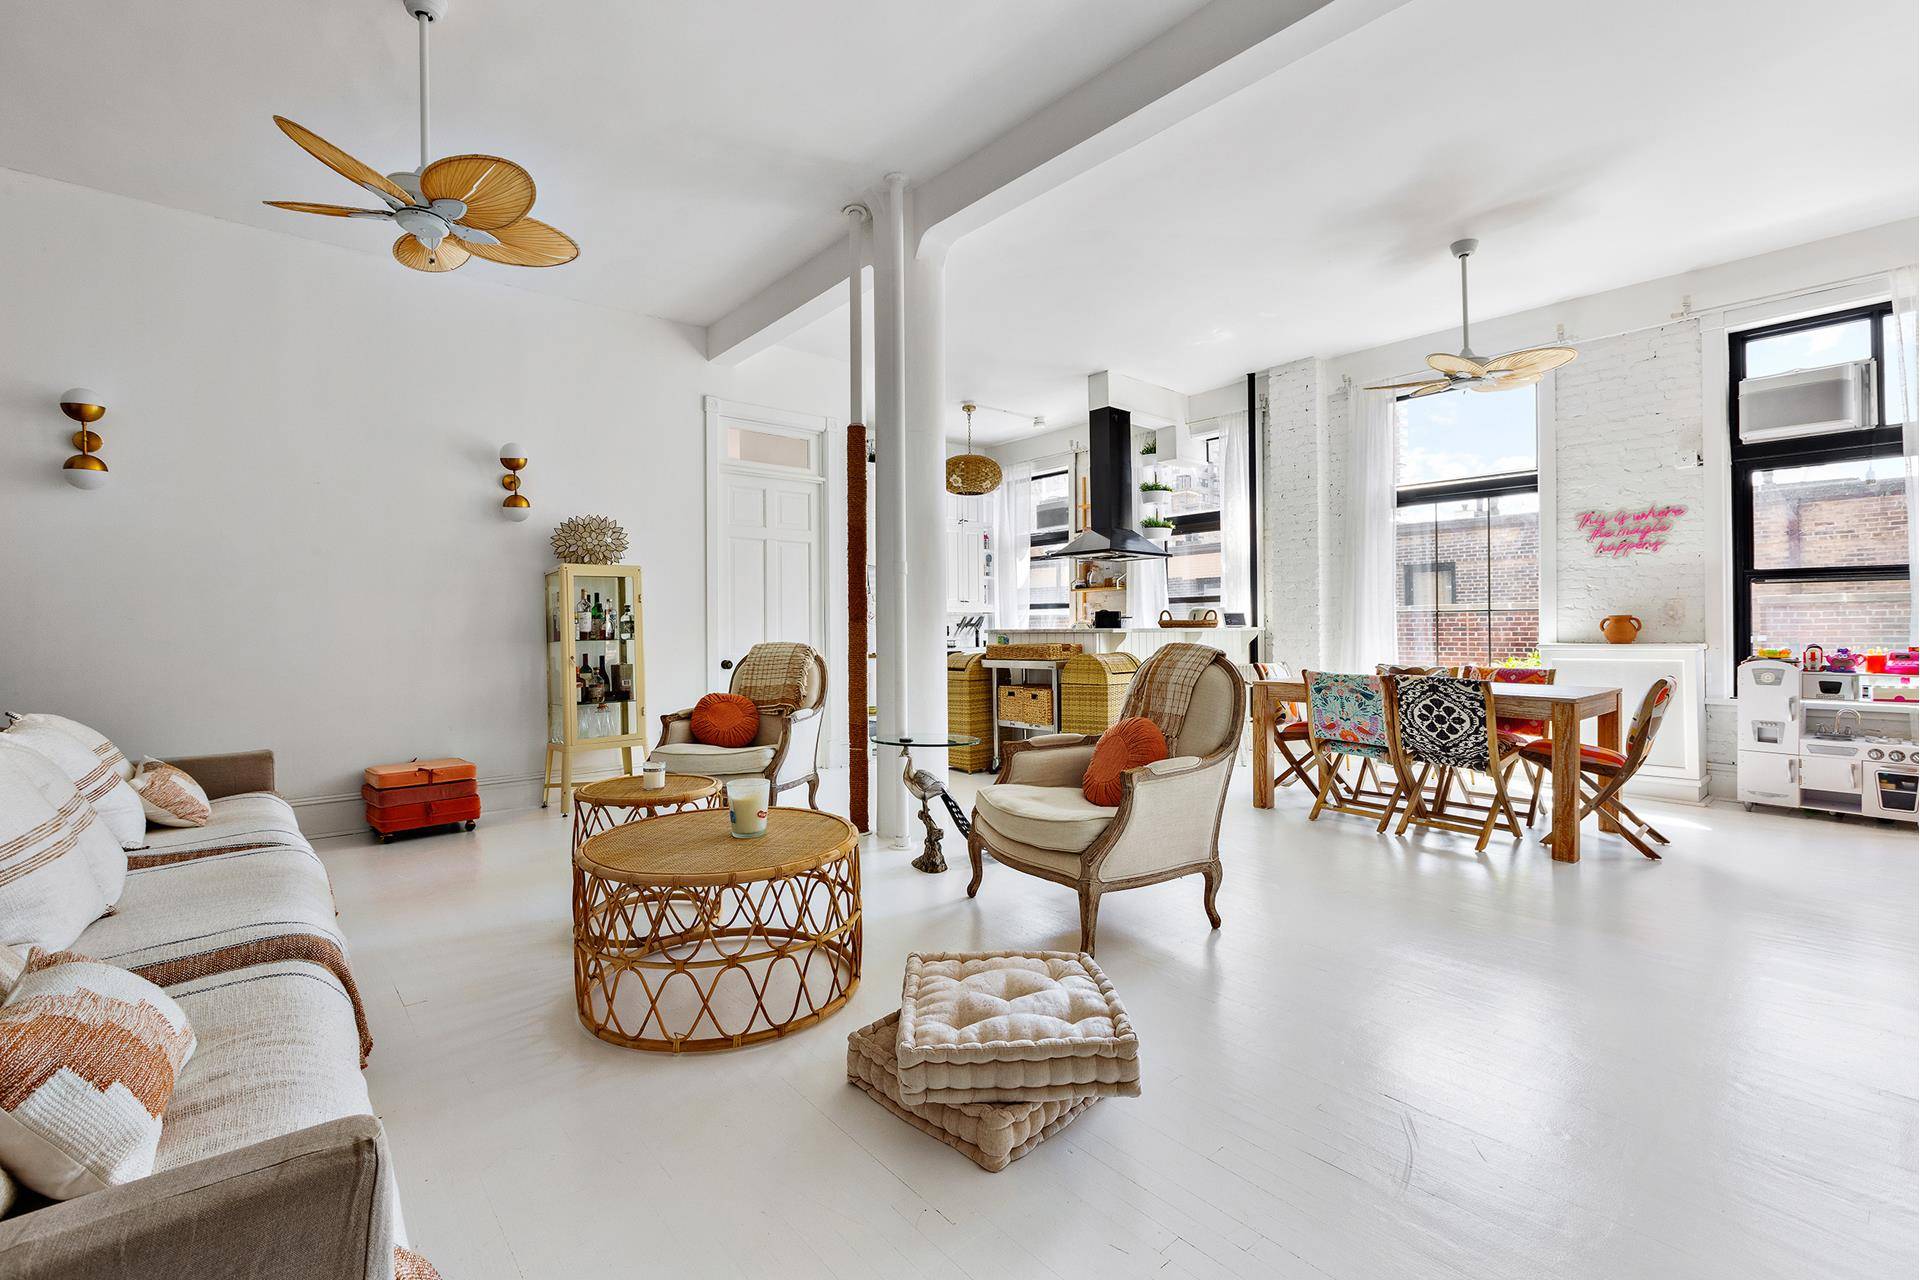 Tranquility awaits at this breezy, light filled loft on a quintessential Greenwich Village block.